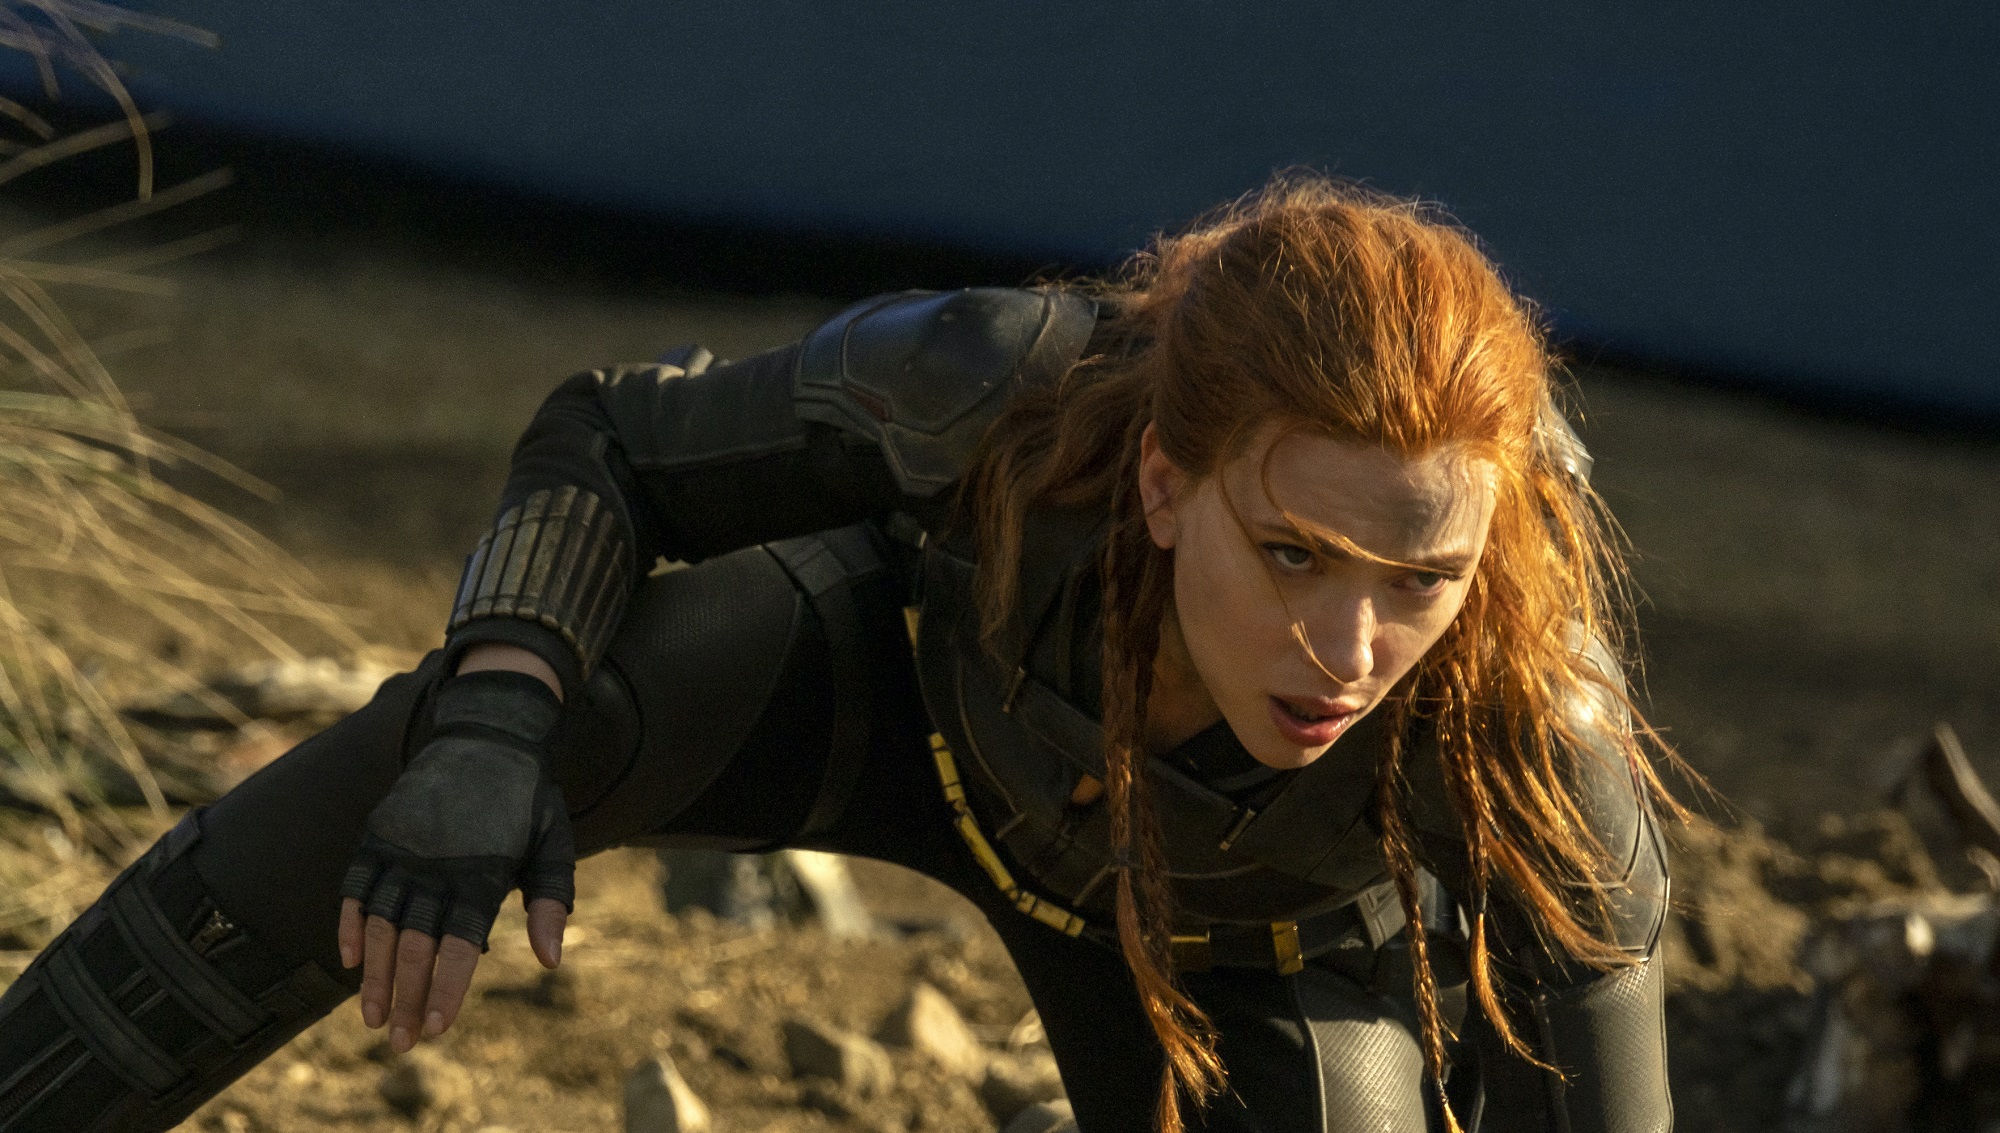 Here's when you can watch 'Black Widow' for free on Disney+